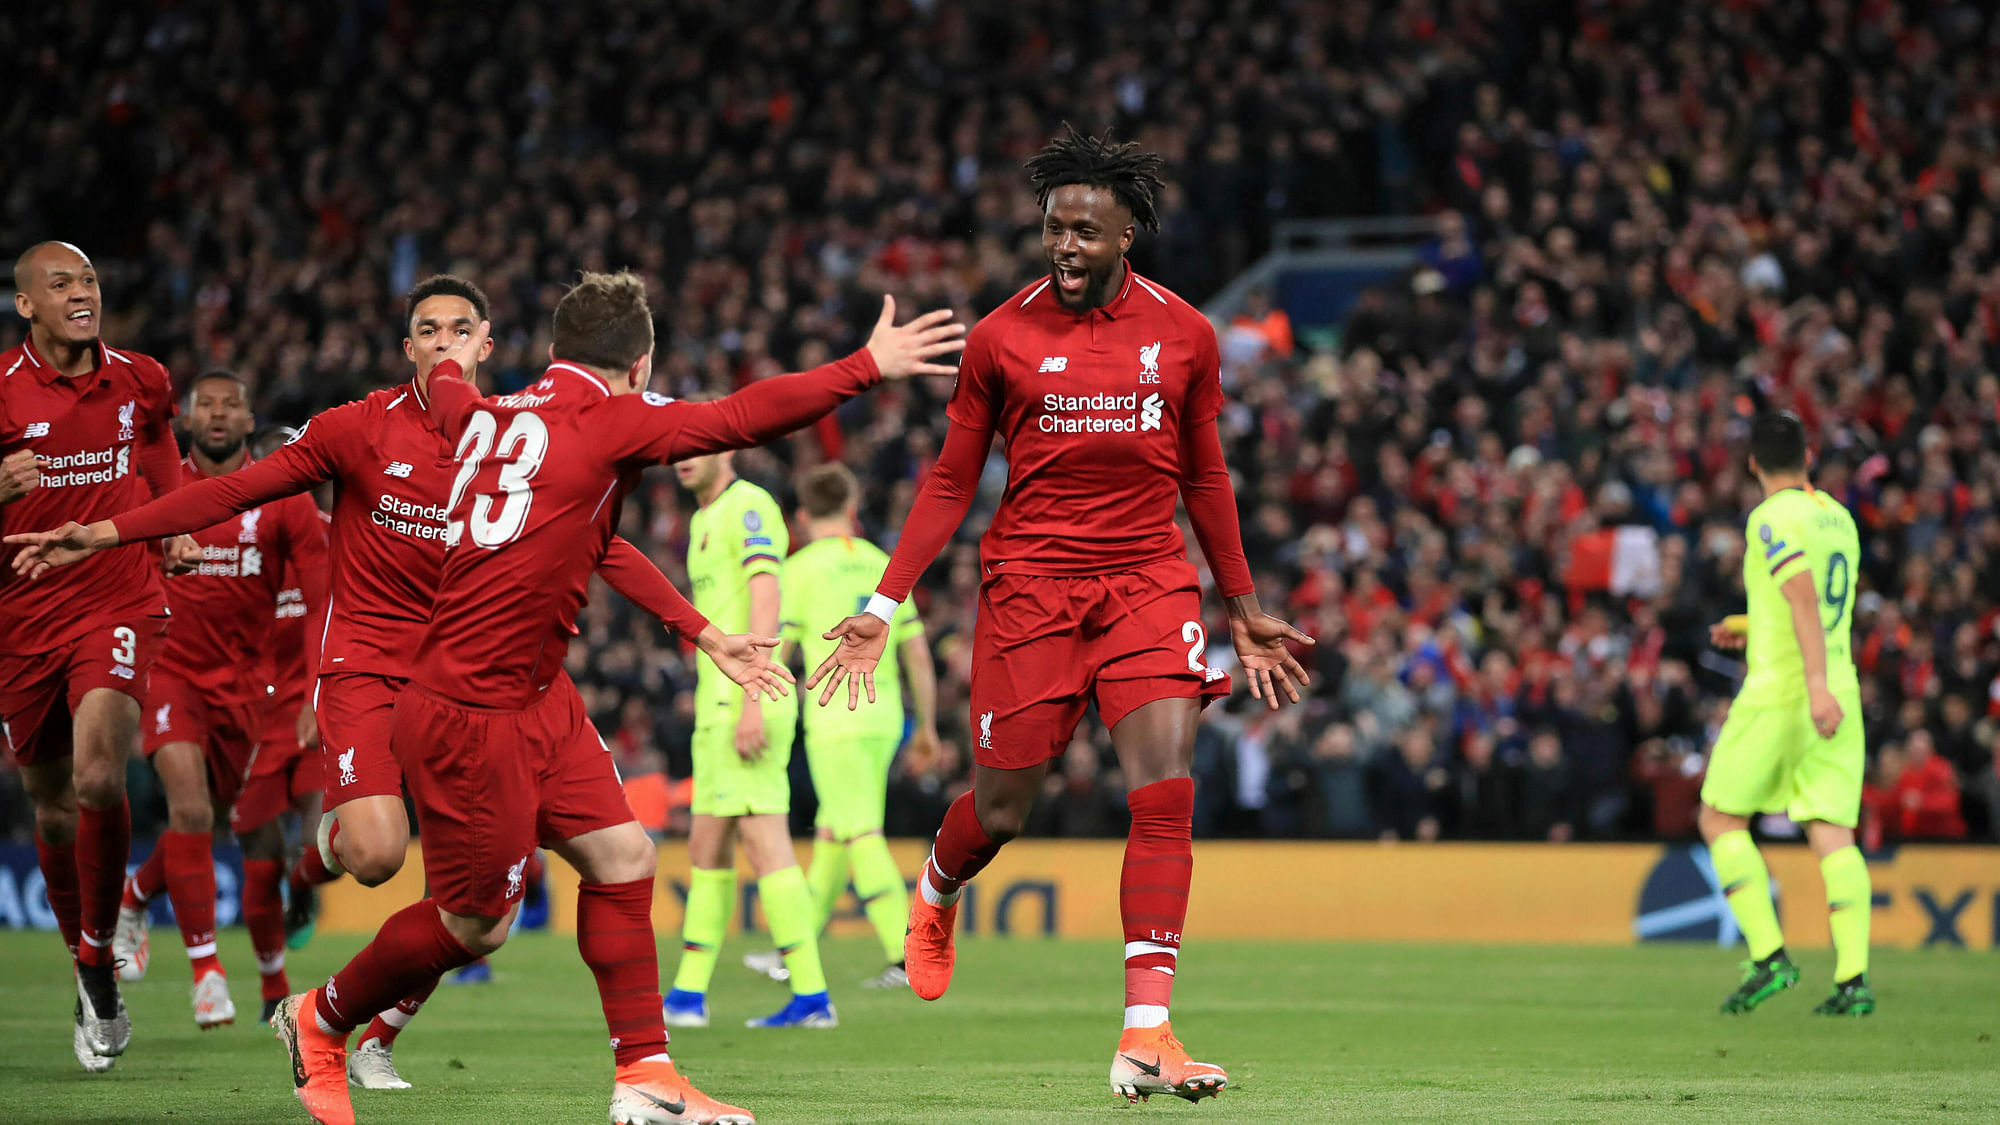 Liverpool’s Divock Origi, center, celebrates scoring his side’s fourth goal of the game during the Champions League Semi Final, second leg soccer match between Liverpool and Barcelona at Anfield, Liverpool.&nbsp;